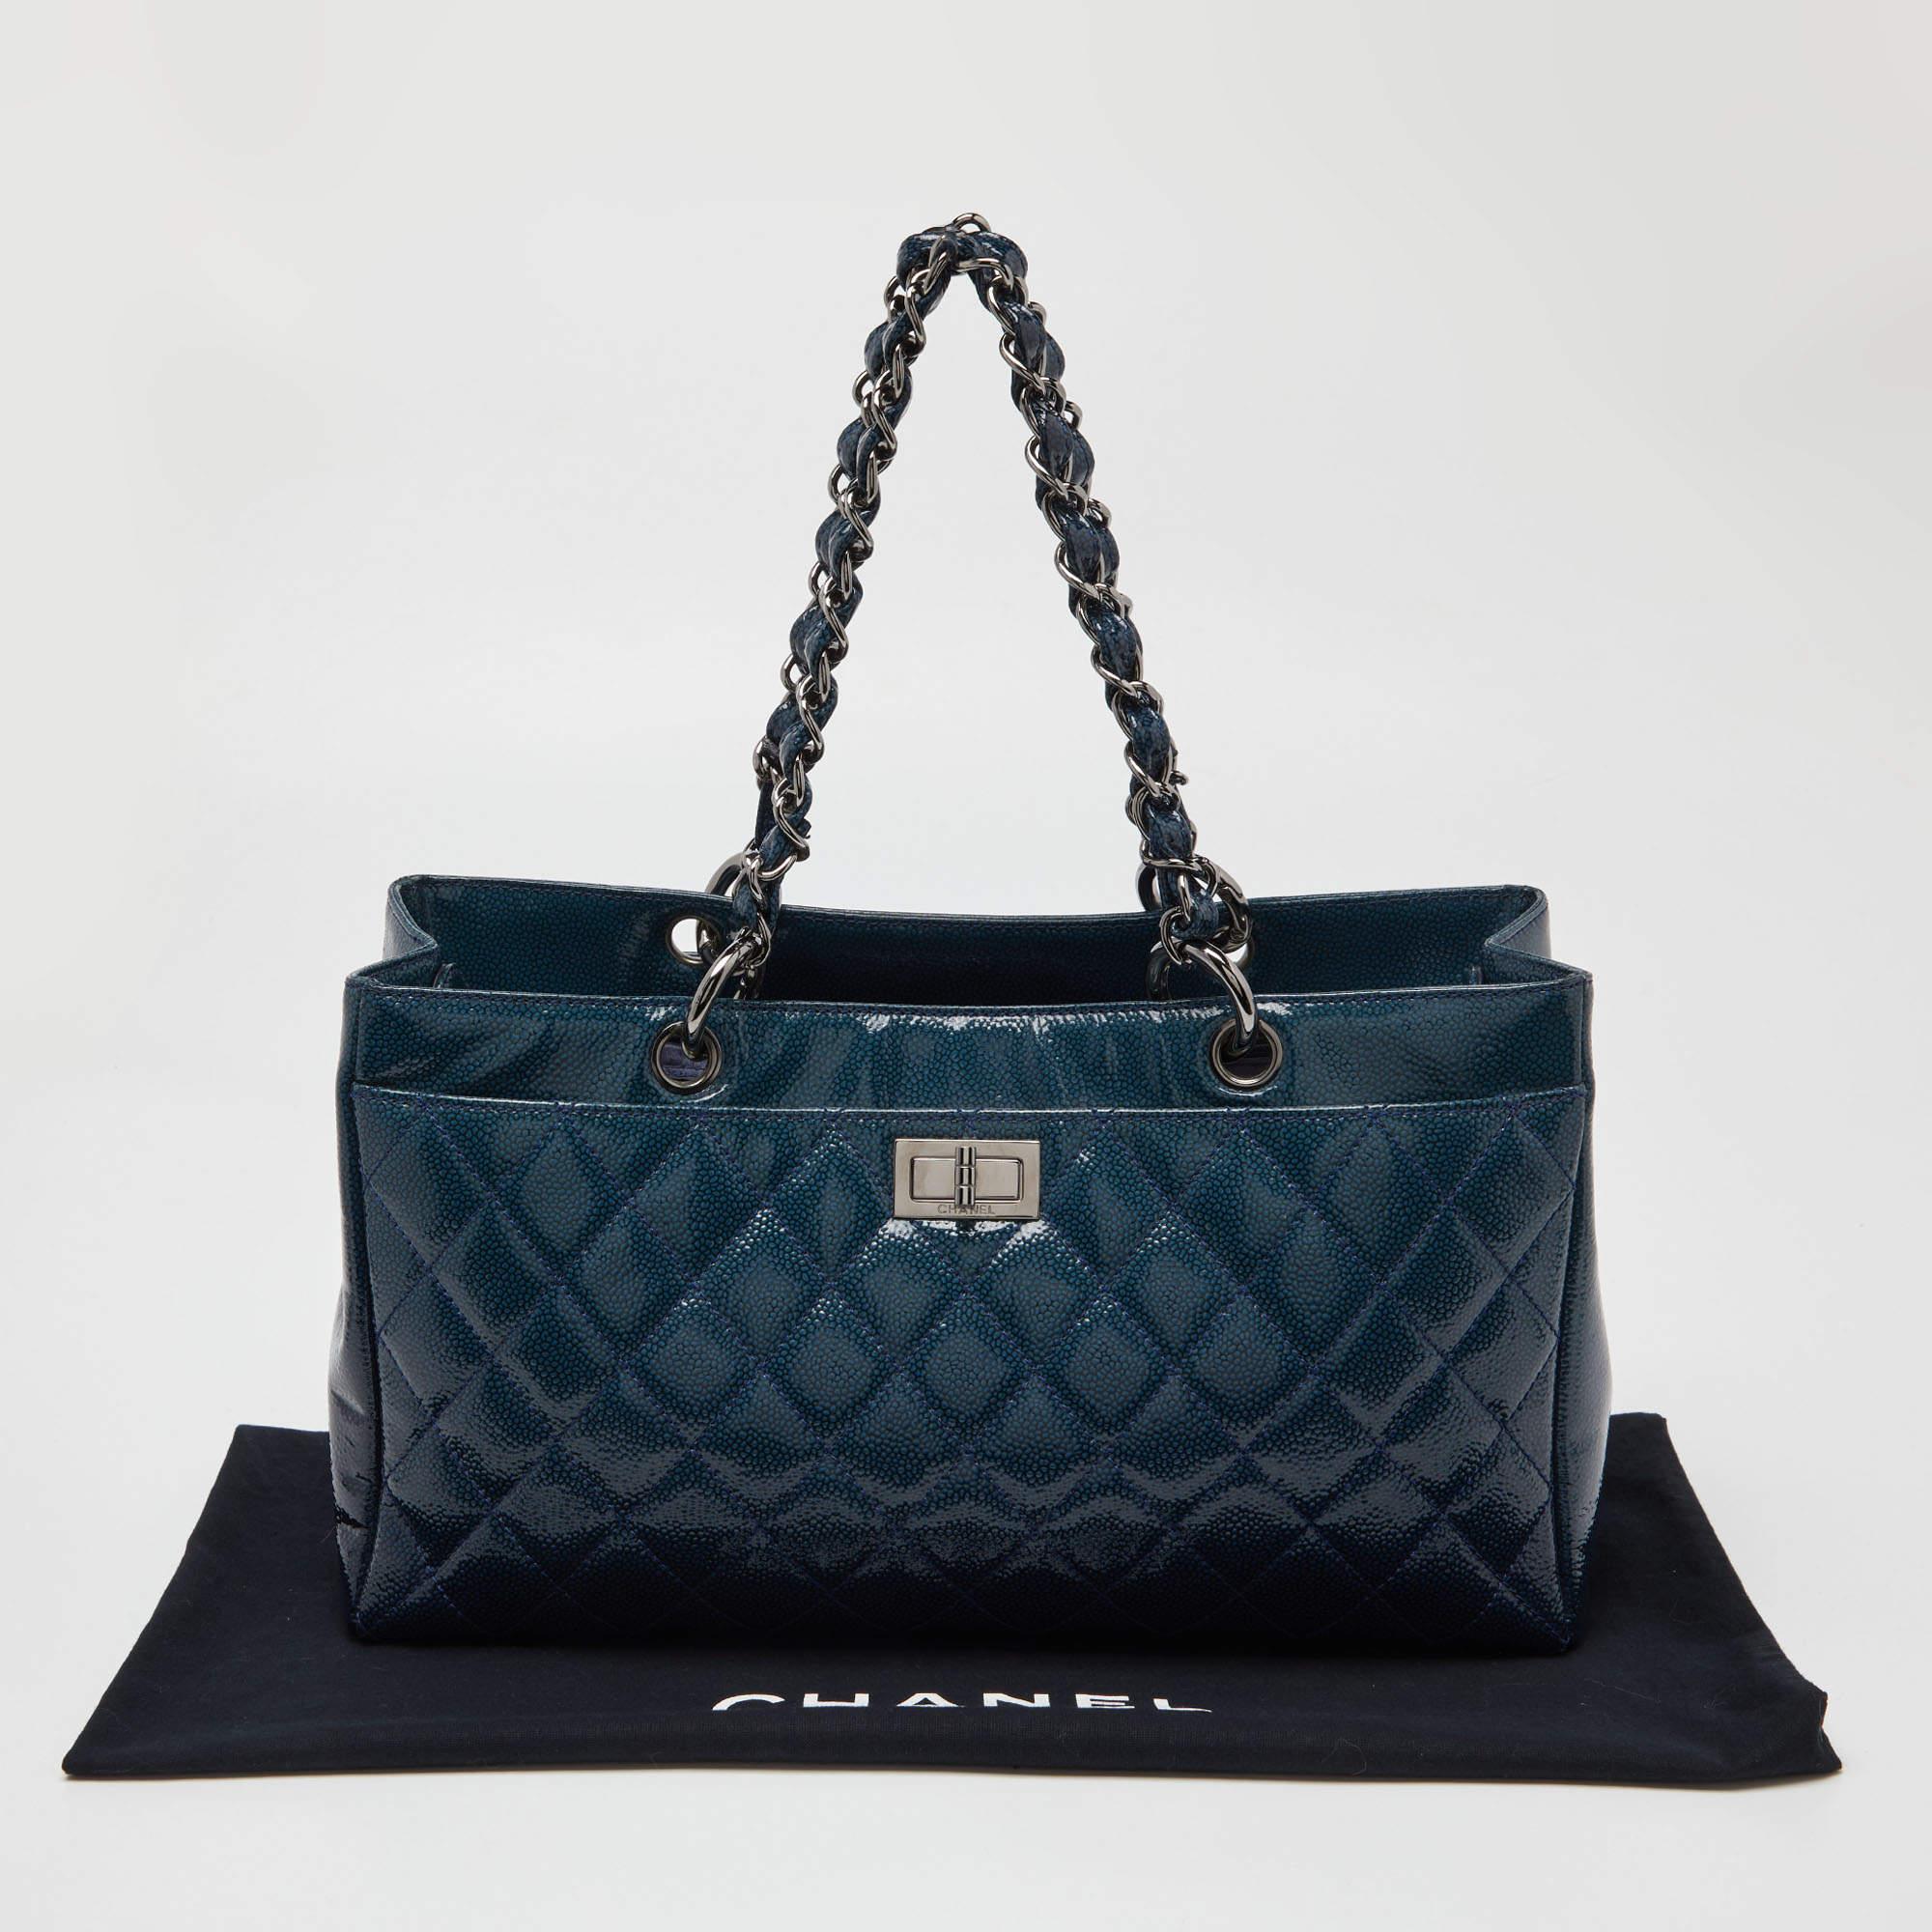 Chanel Blue Diamond Shine Quilted Leather Reissue Tote 7